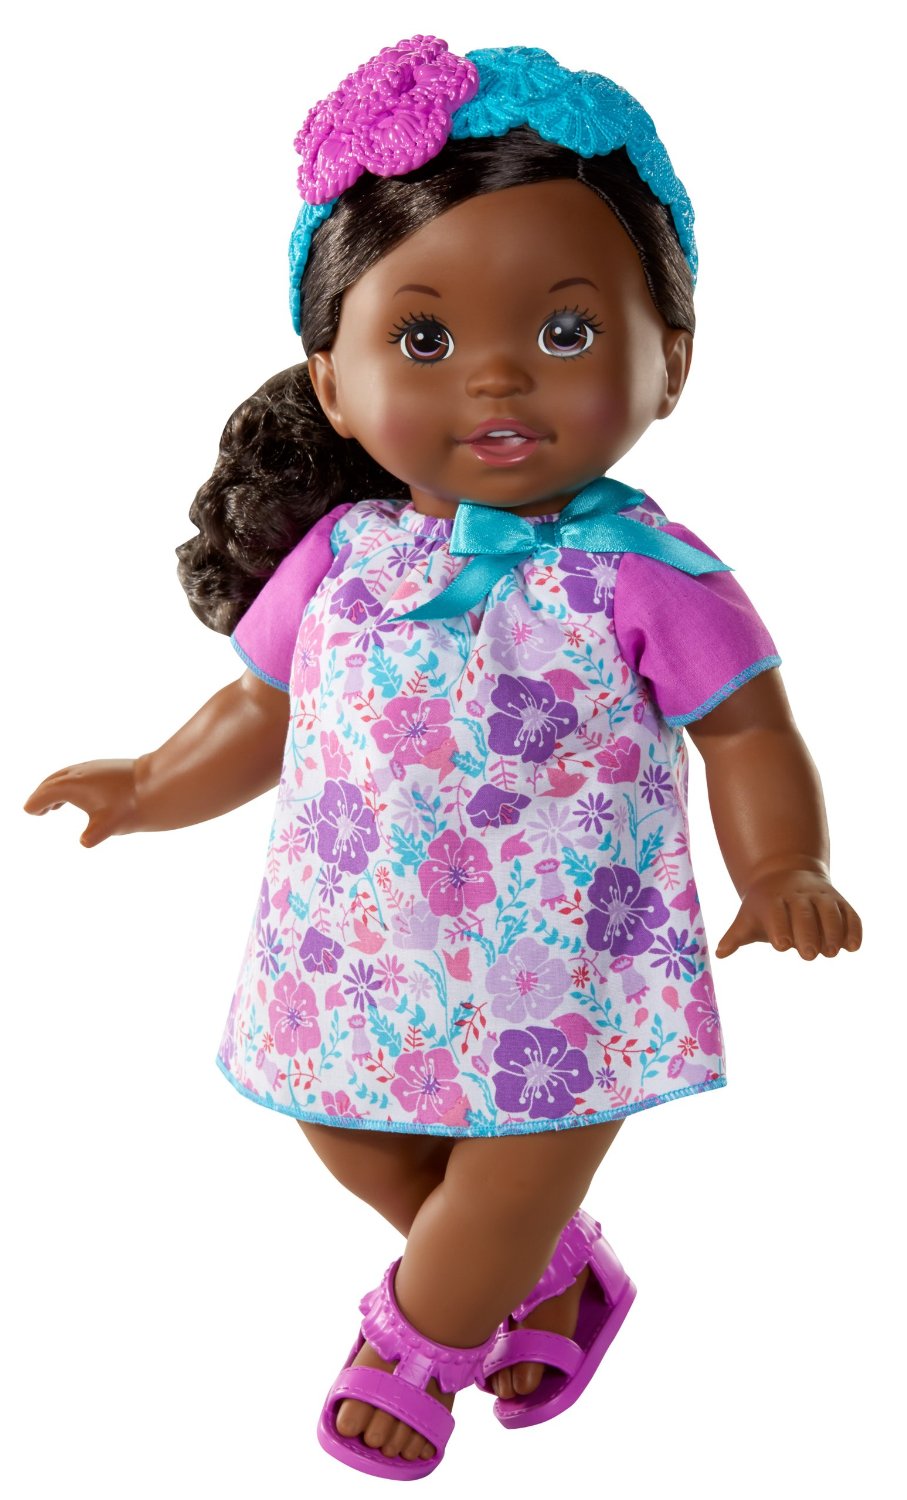 dress me doll for toddlers